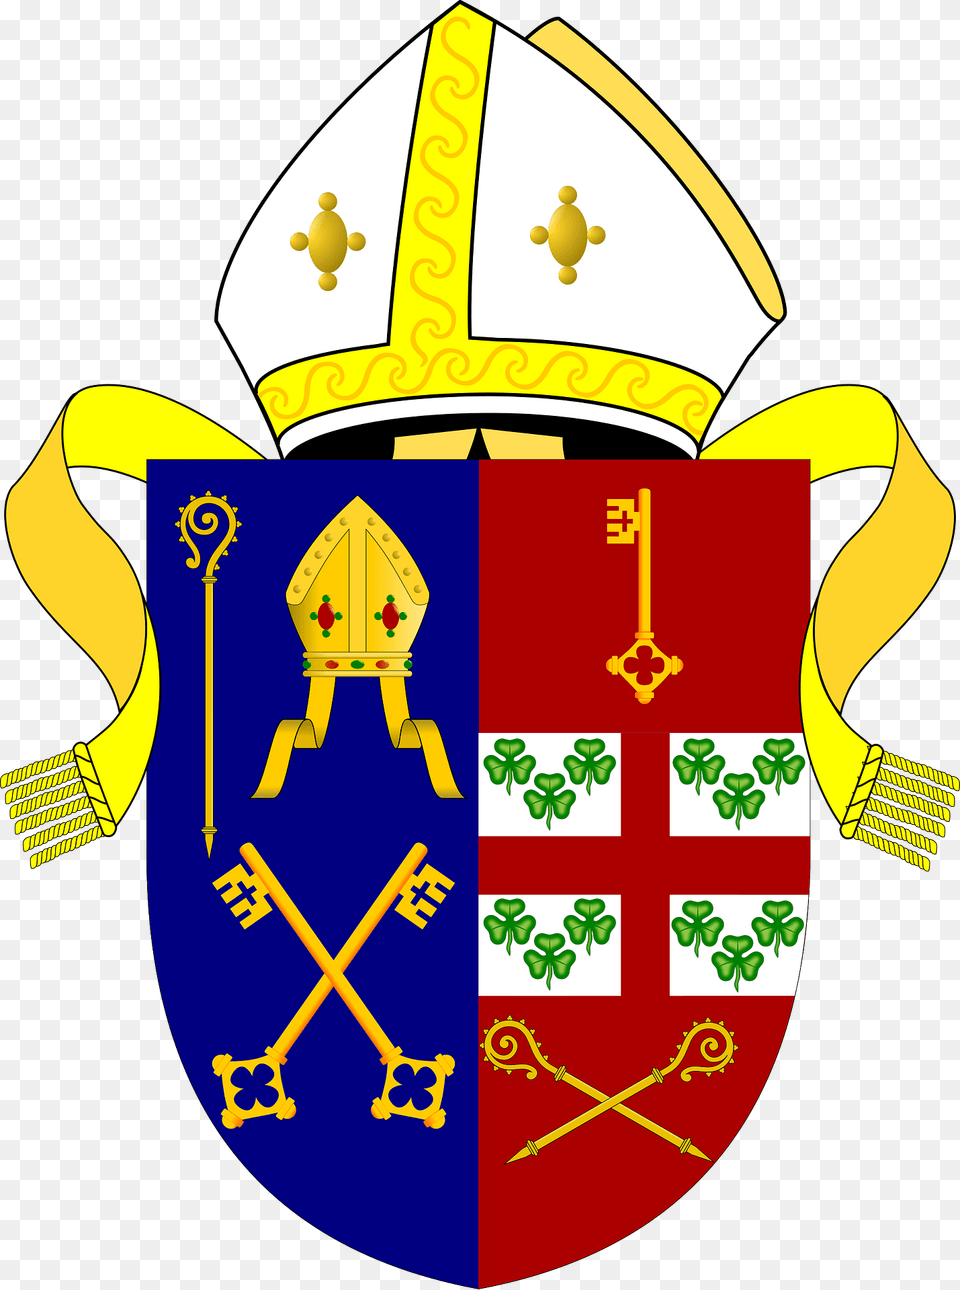 Diocese Of Limerick And Killaloe Arms Clipart, Armor, Shield, Baby, Person Png